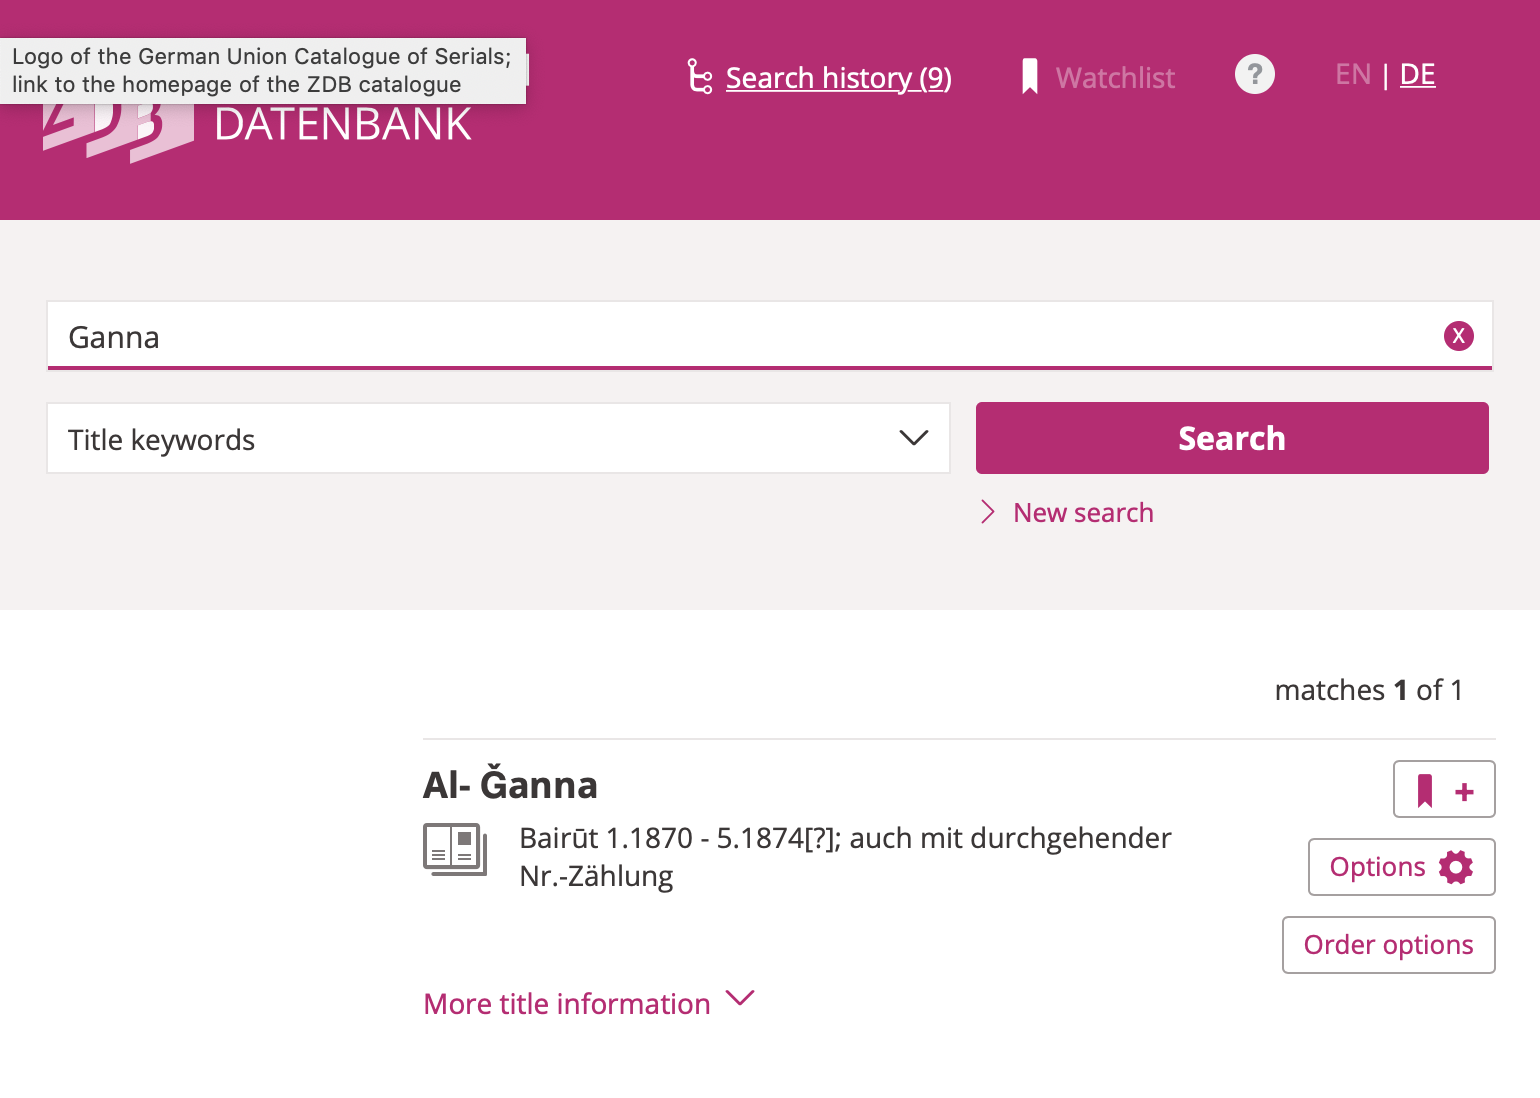 Successfully searching the union catalogue for periodicals in German-speaking countries for the journal al-Janna in in DMG transcription without diacritics or definite article (Ganna)